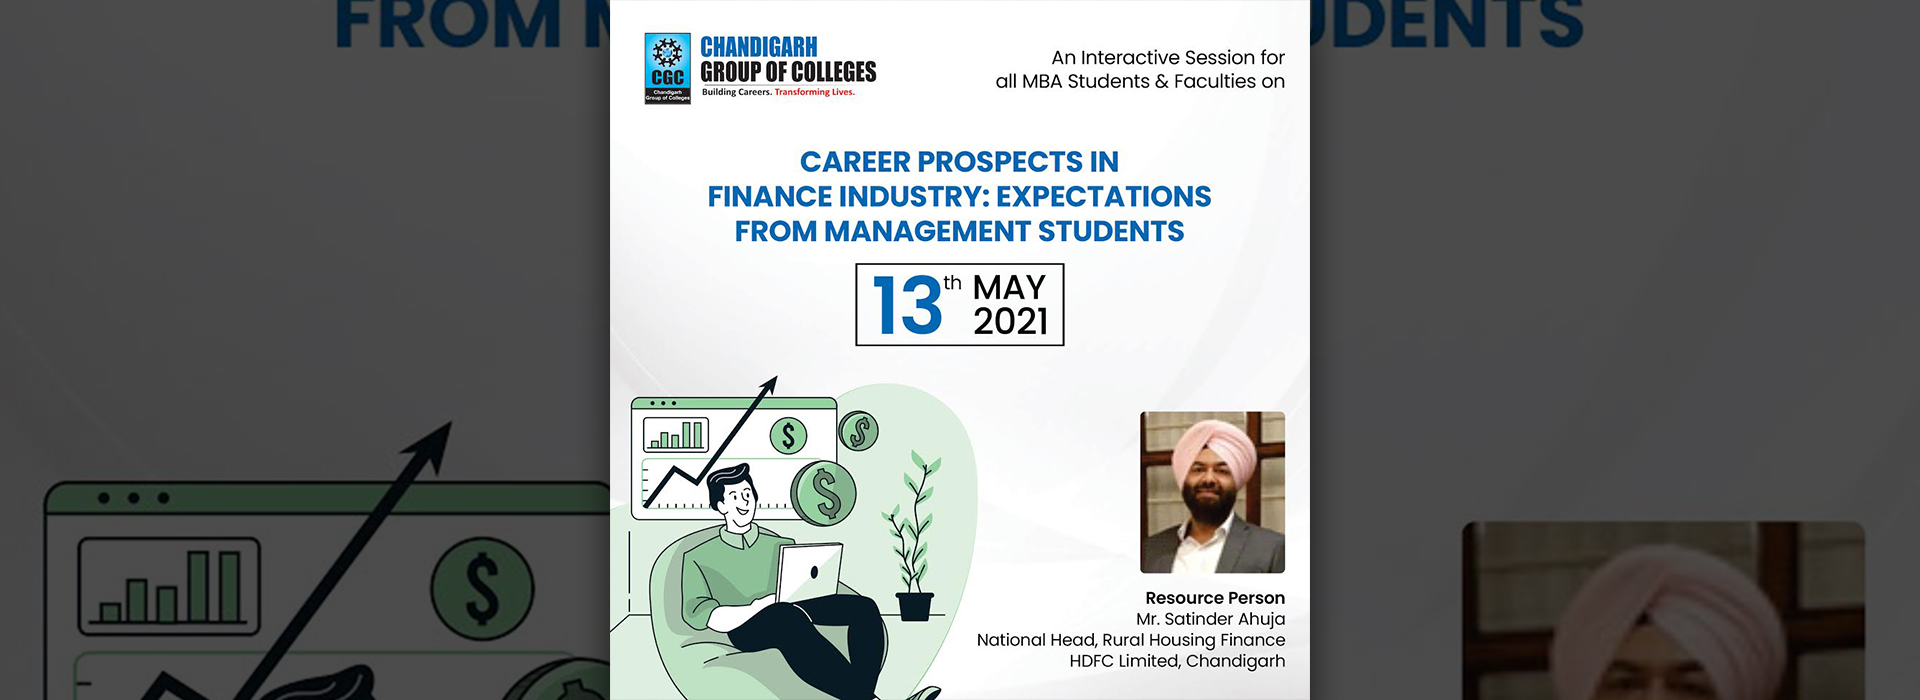 Career Prospects in Finance Industry: Expectations from Management Students 